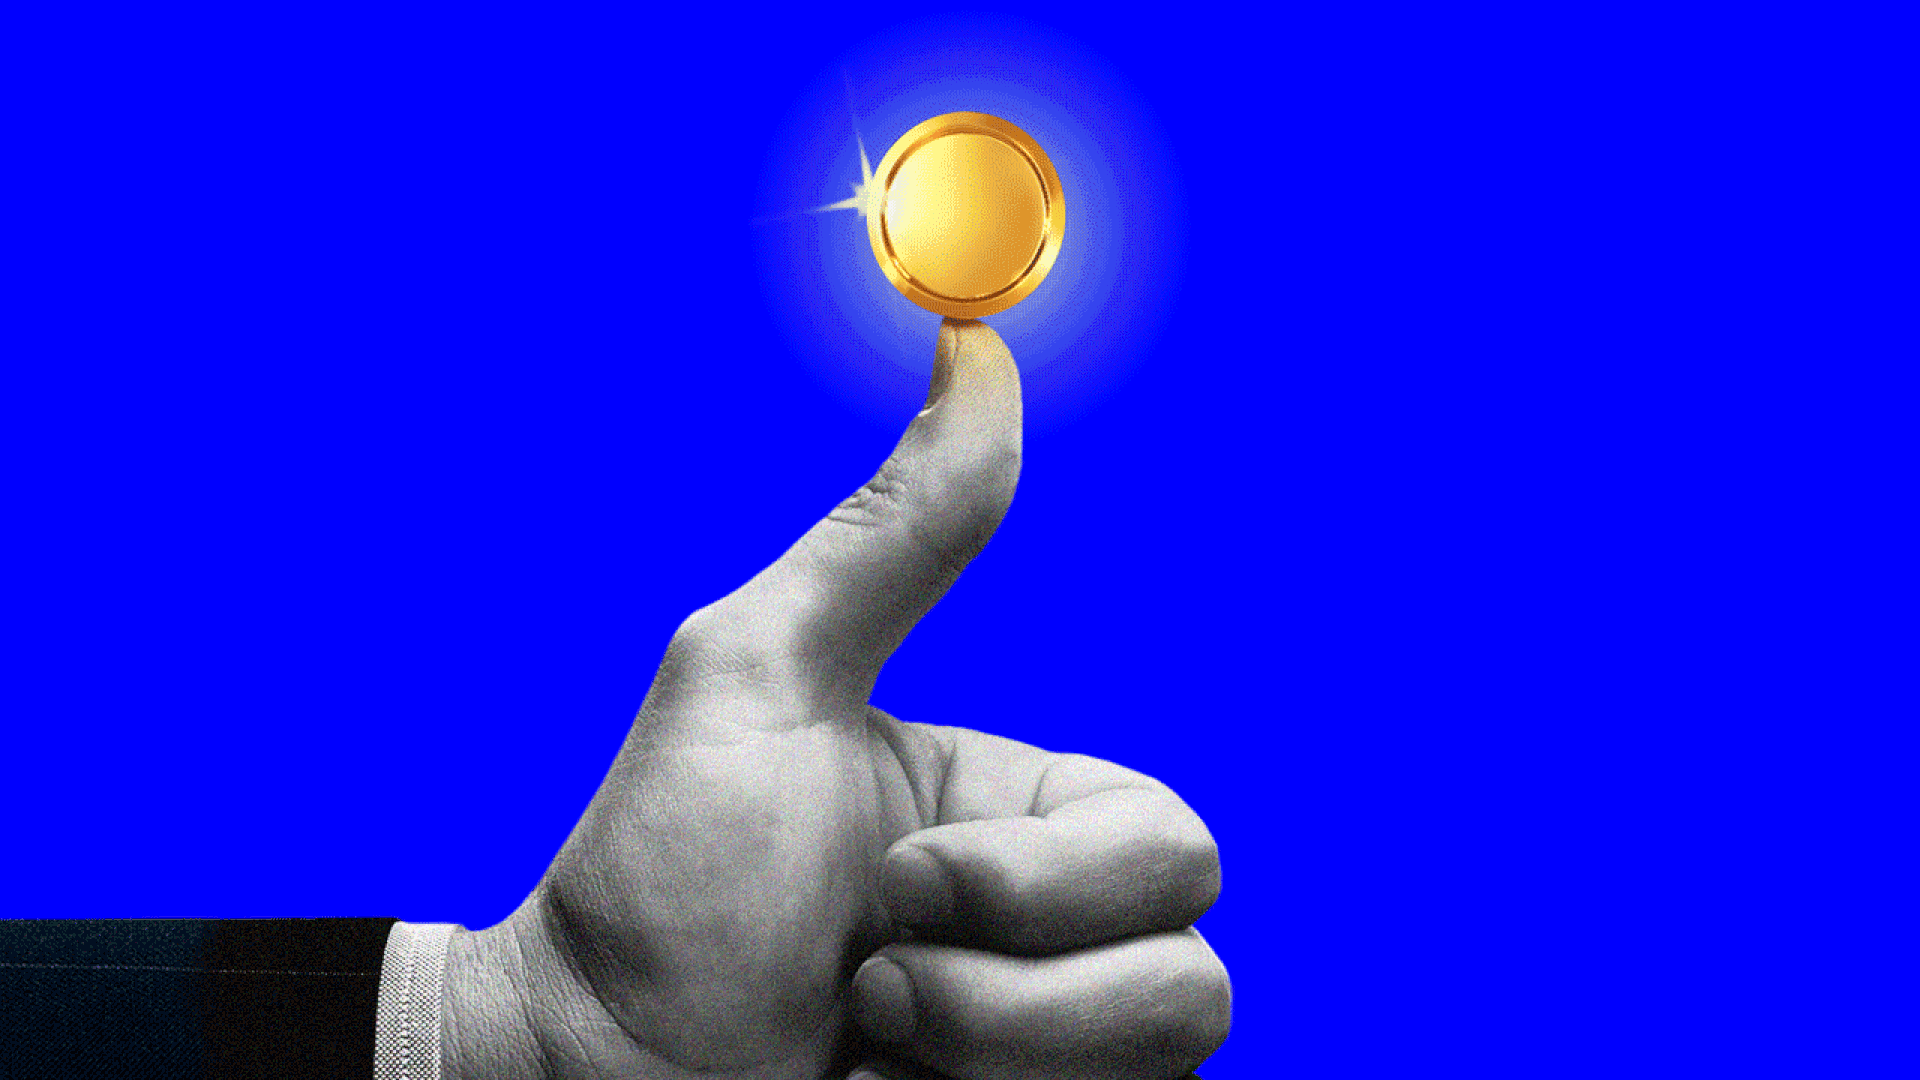 Animated illustration of a suited person's hand in a thumbs up balancing a sparkling golden coin rotating 